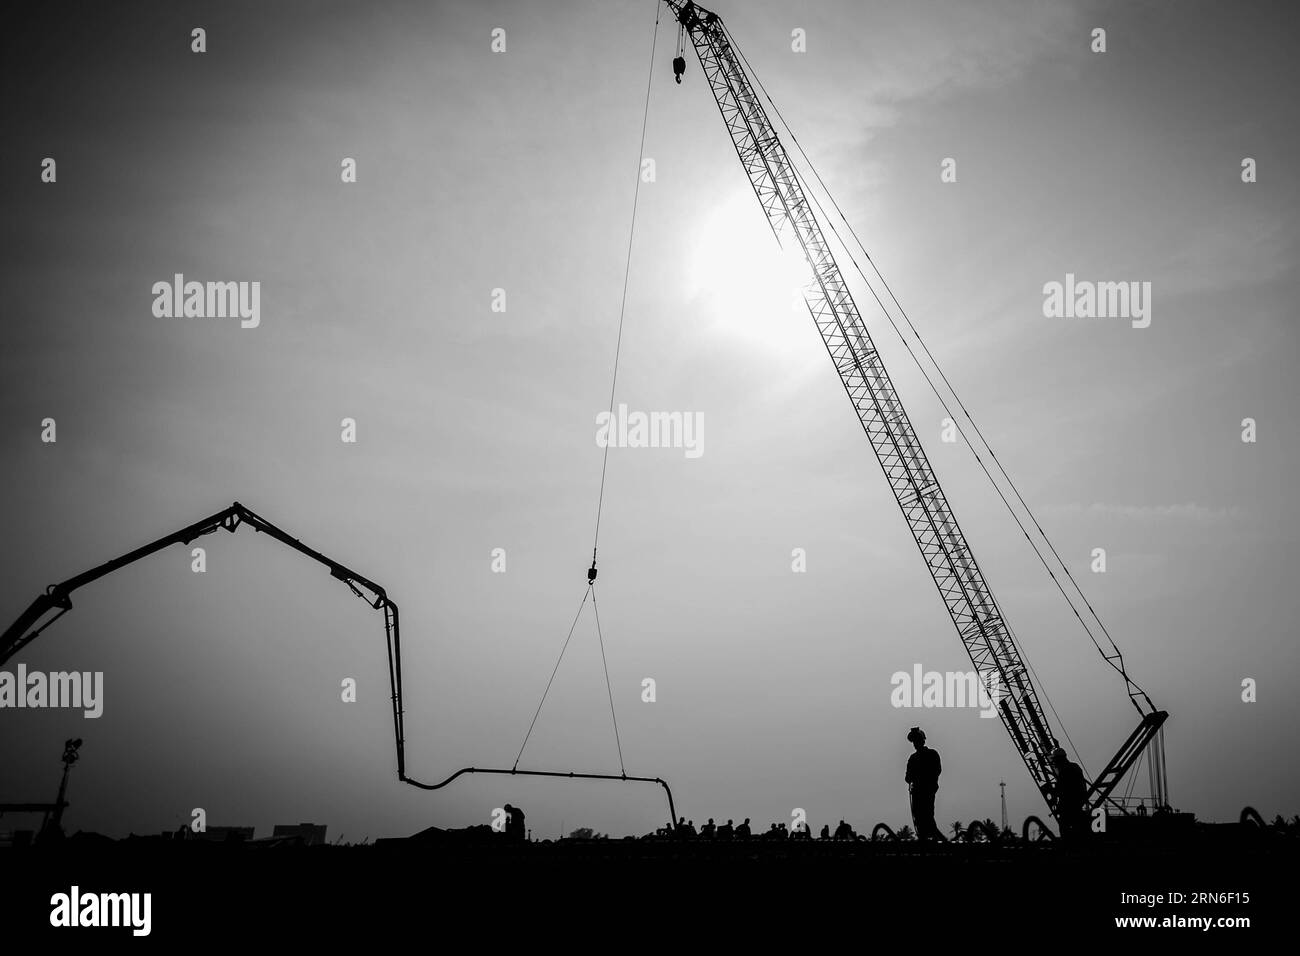 TUXPAN, July 22, 2015 -- Image taken on July 22, 2015 shows a Mexican employee working at the construction site of the Tuxpan Port Terminal in Tuxpan city, Veracruz state, Mexico. Around 90 employees from China and 100 from Mexico have been working for a year in the construction site of the port terminal for containers, vehicles and agricultural material. This is the second construction project made by Chinese company with labor from Chinese and Mexican origins. Pedro Mera) (fnc) MEXICO-TUXPAN-CHINA-INDUSTRY-PORT-FEATURE e PedroxMera PUBLICATIONxNOTxINxCHN   Tuxpan July 22 2015 Image Taken ON Stock Photo